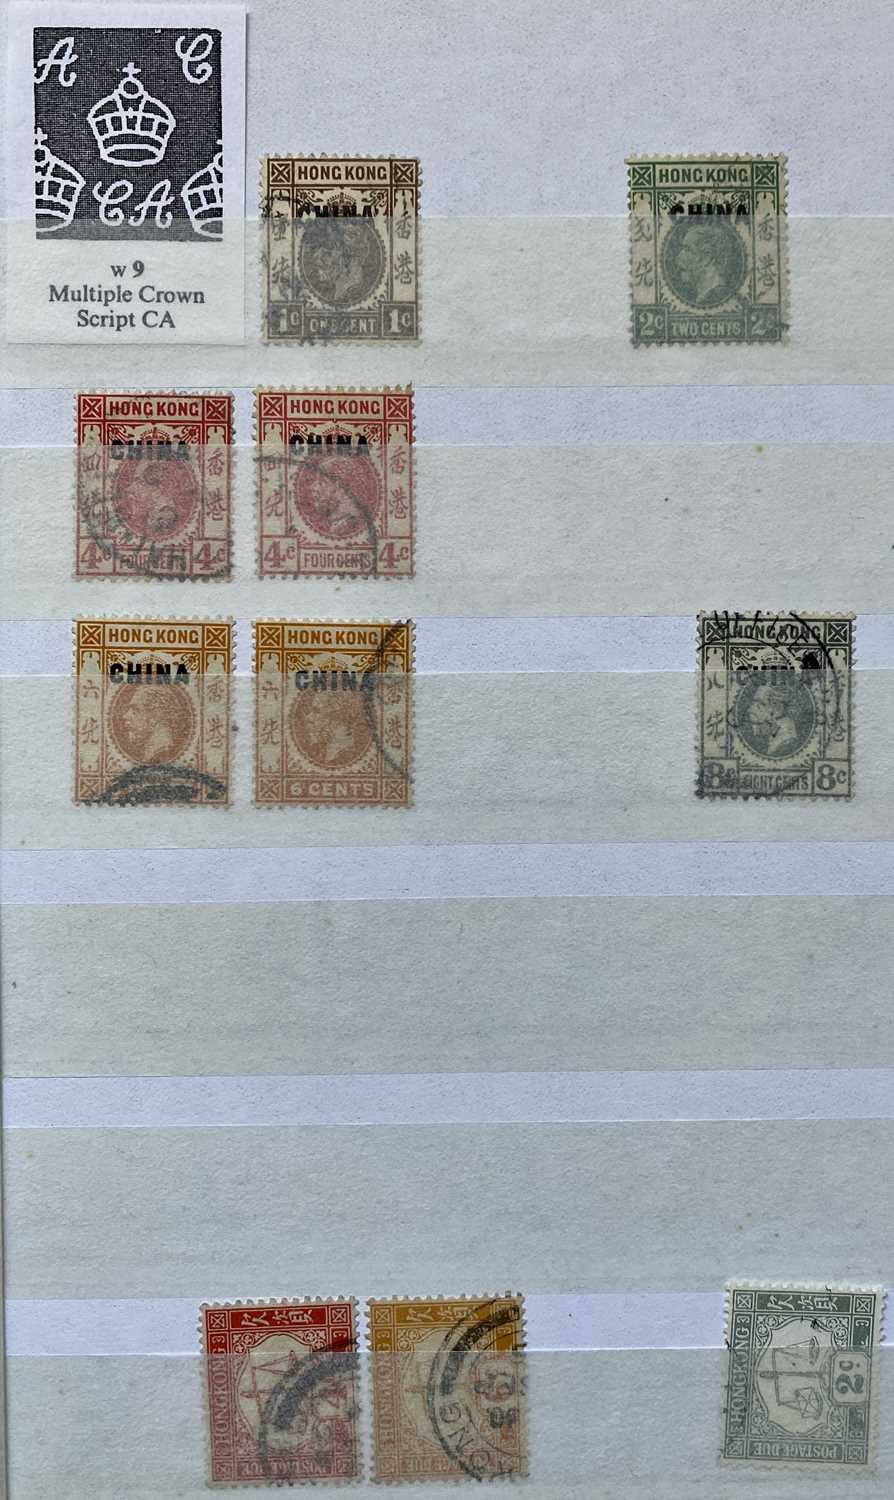 VERY GOOD HONG KONG UNMOUNTED MINT & FINE USED HIGH CAT VALUE, OVERPRINTS ETC - Image 3 of 19